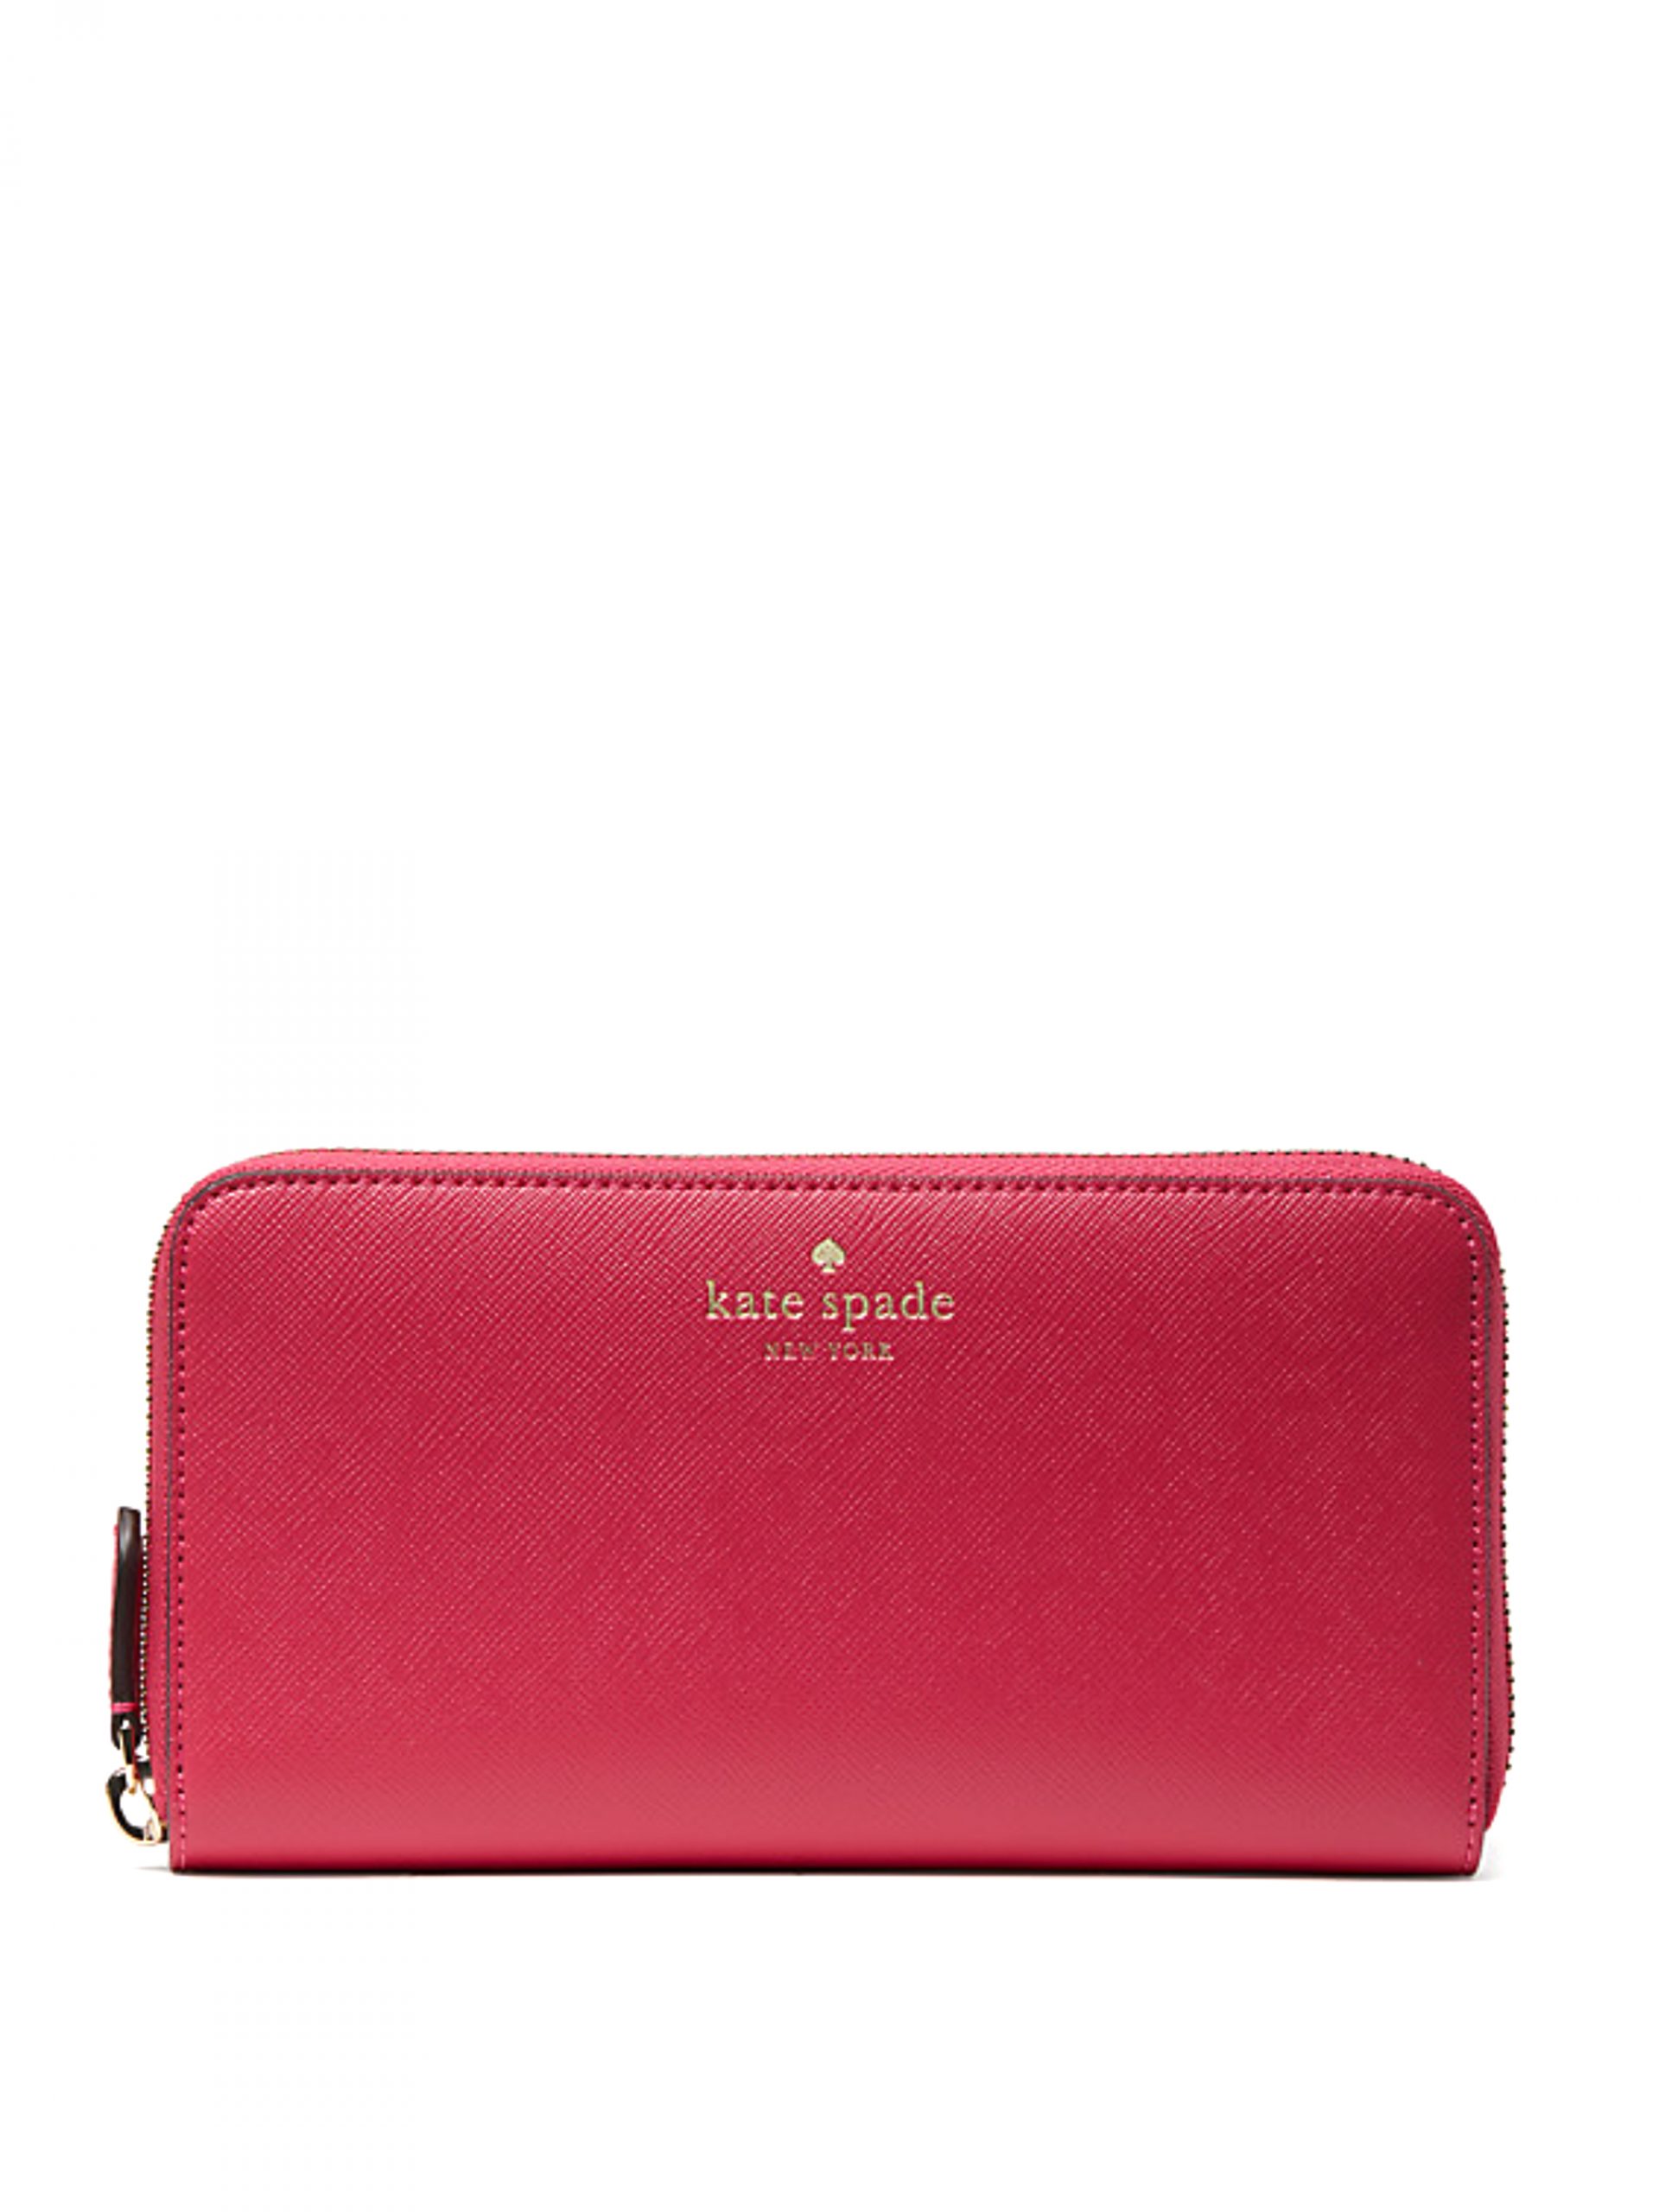 Kate Spade Brynn Large Continental Wallet Pink Ruby - Averand